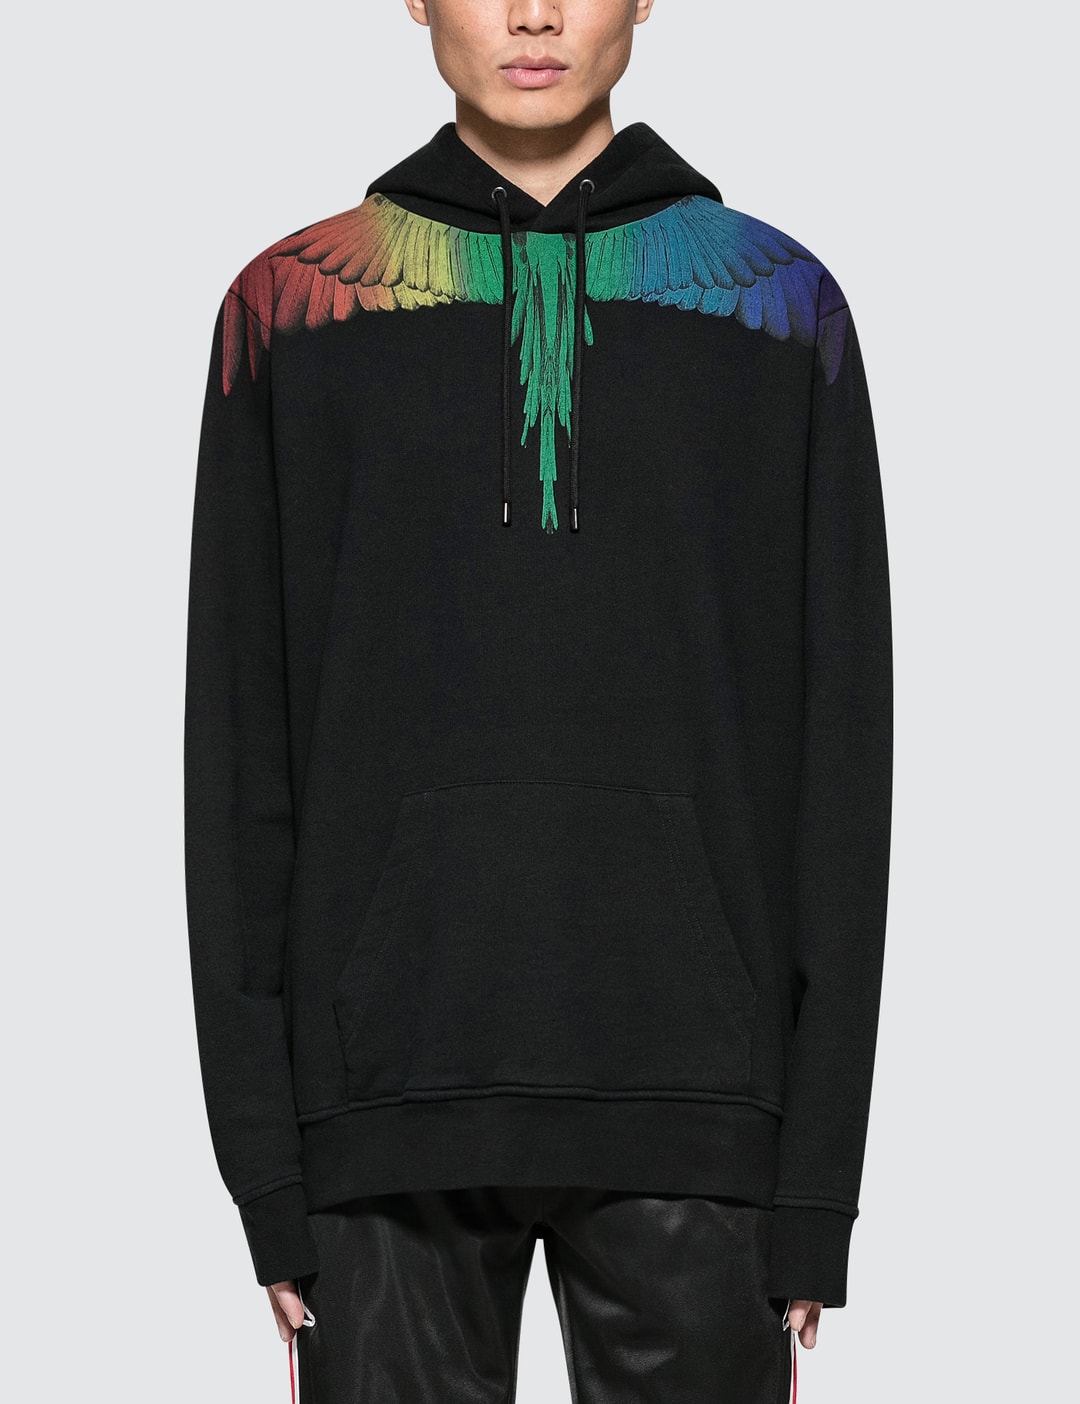 Burlon - Rainbow Wing Hoodie | HBX - Globally Curated Fashion and Lifestyle by Hypebeast